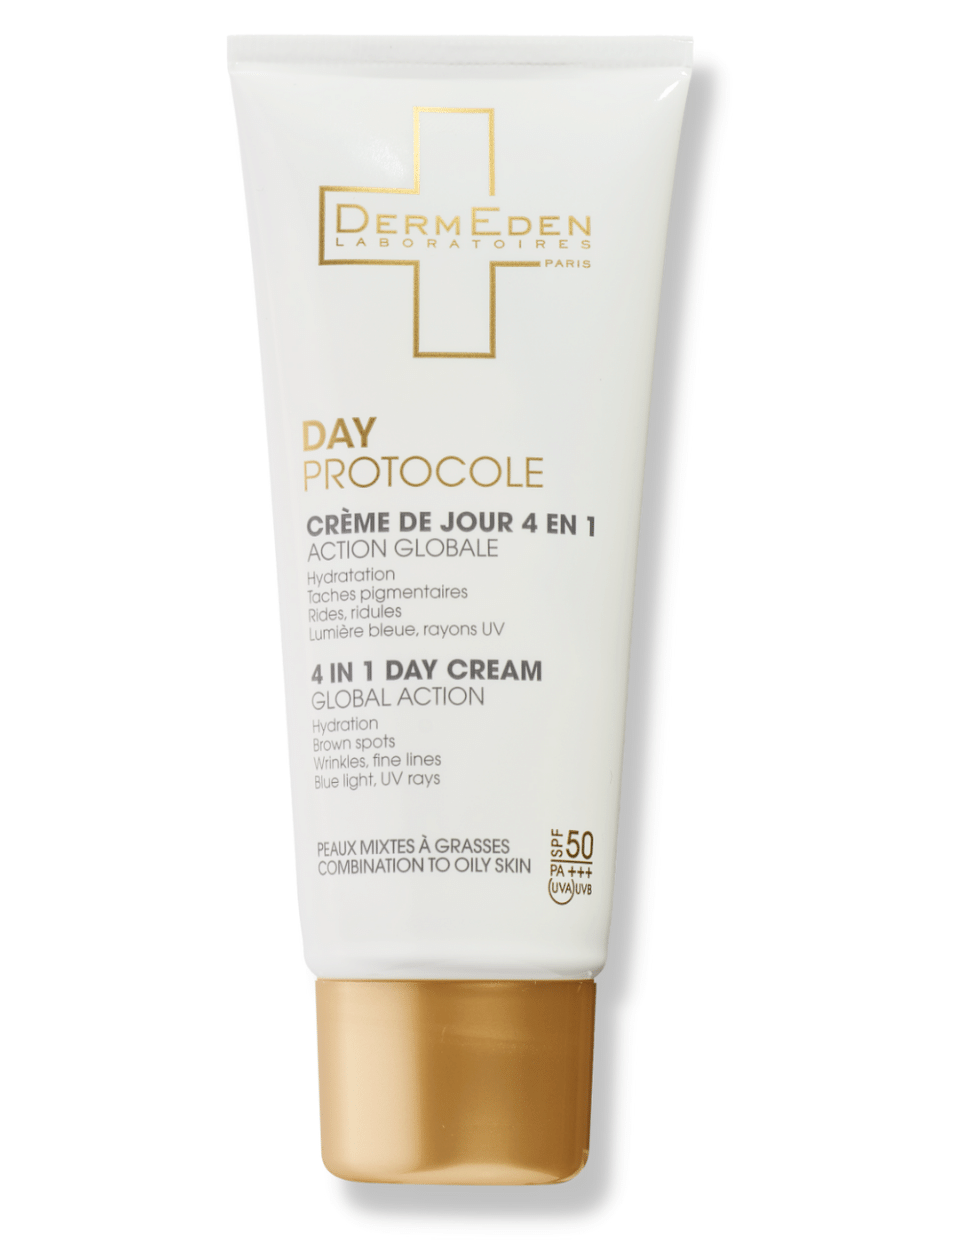 4 IN 1 DAY CREAM GLOBAL ACTION COMBINATION SKIN